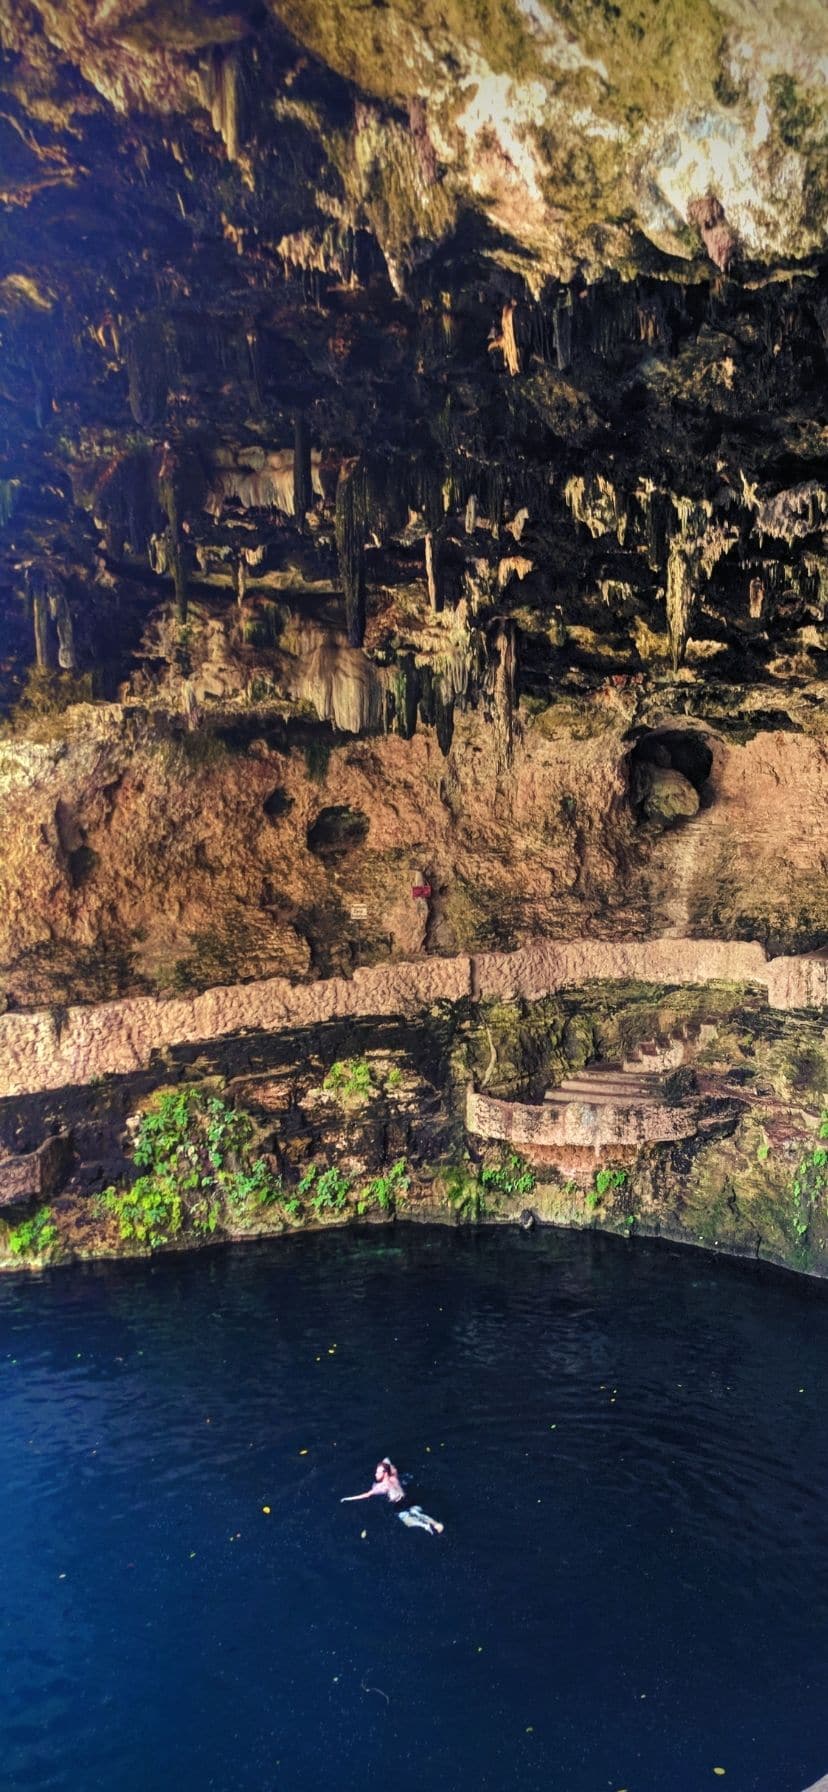 The Cenotes near Cancun are amazing and really easy to add to a beach vacation. Cenotes are even easy to visit as a cruise excursion from a Caribbean Mexico port of call or Yucatan road trip.